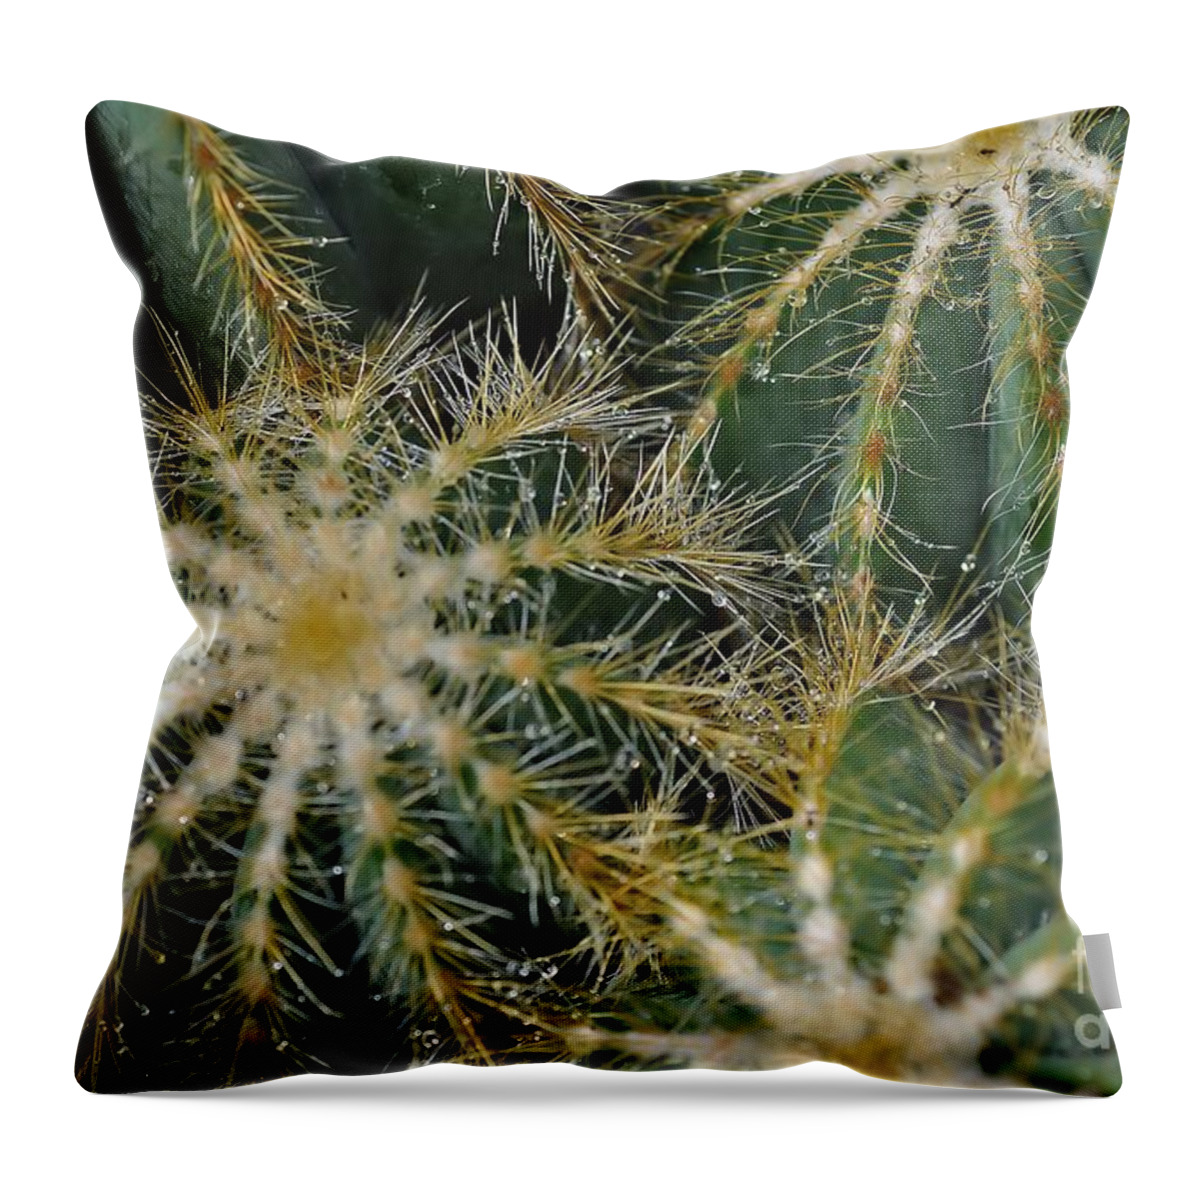 Cactus Throw Pillow featuring the photograph Cacti  Water Drops by Elaine Manley